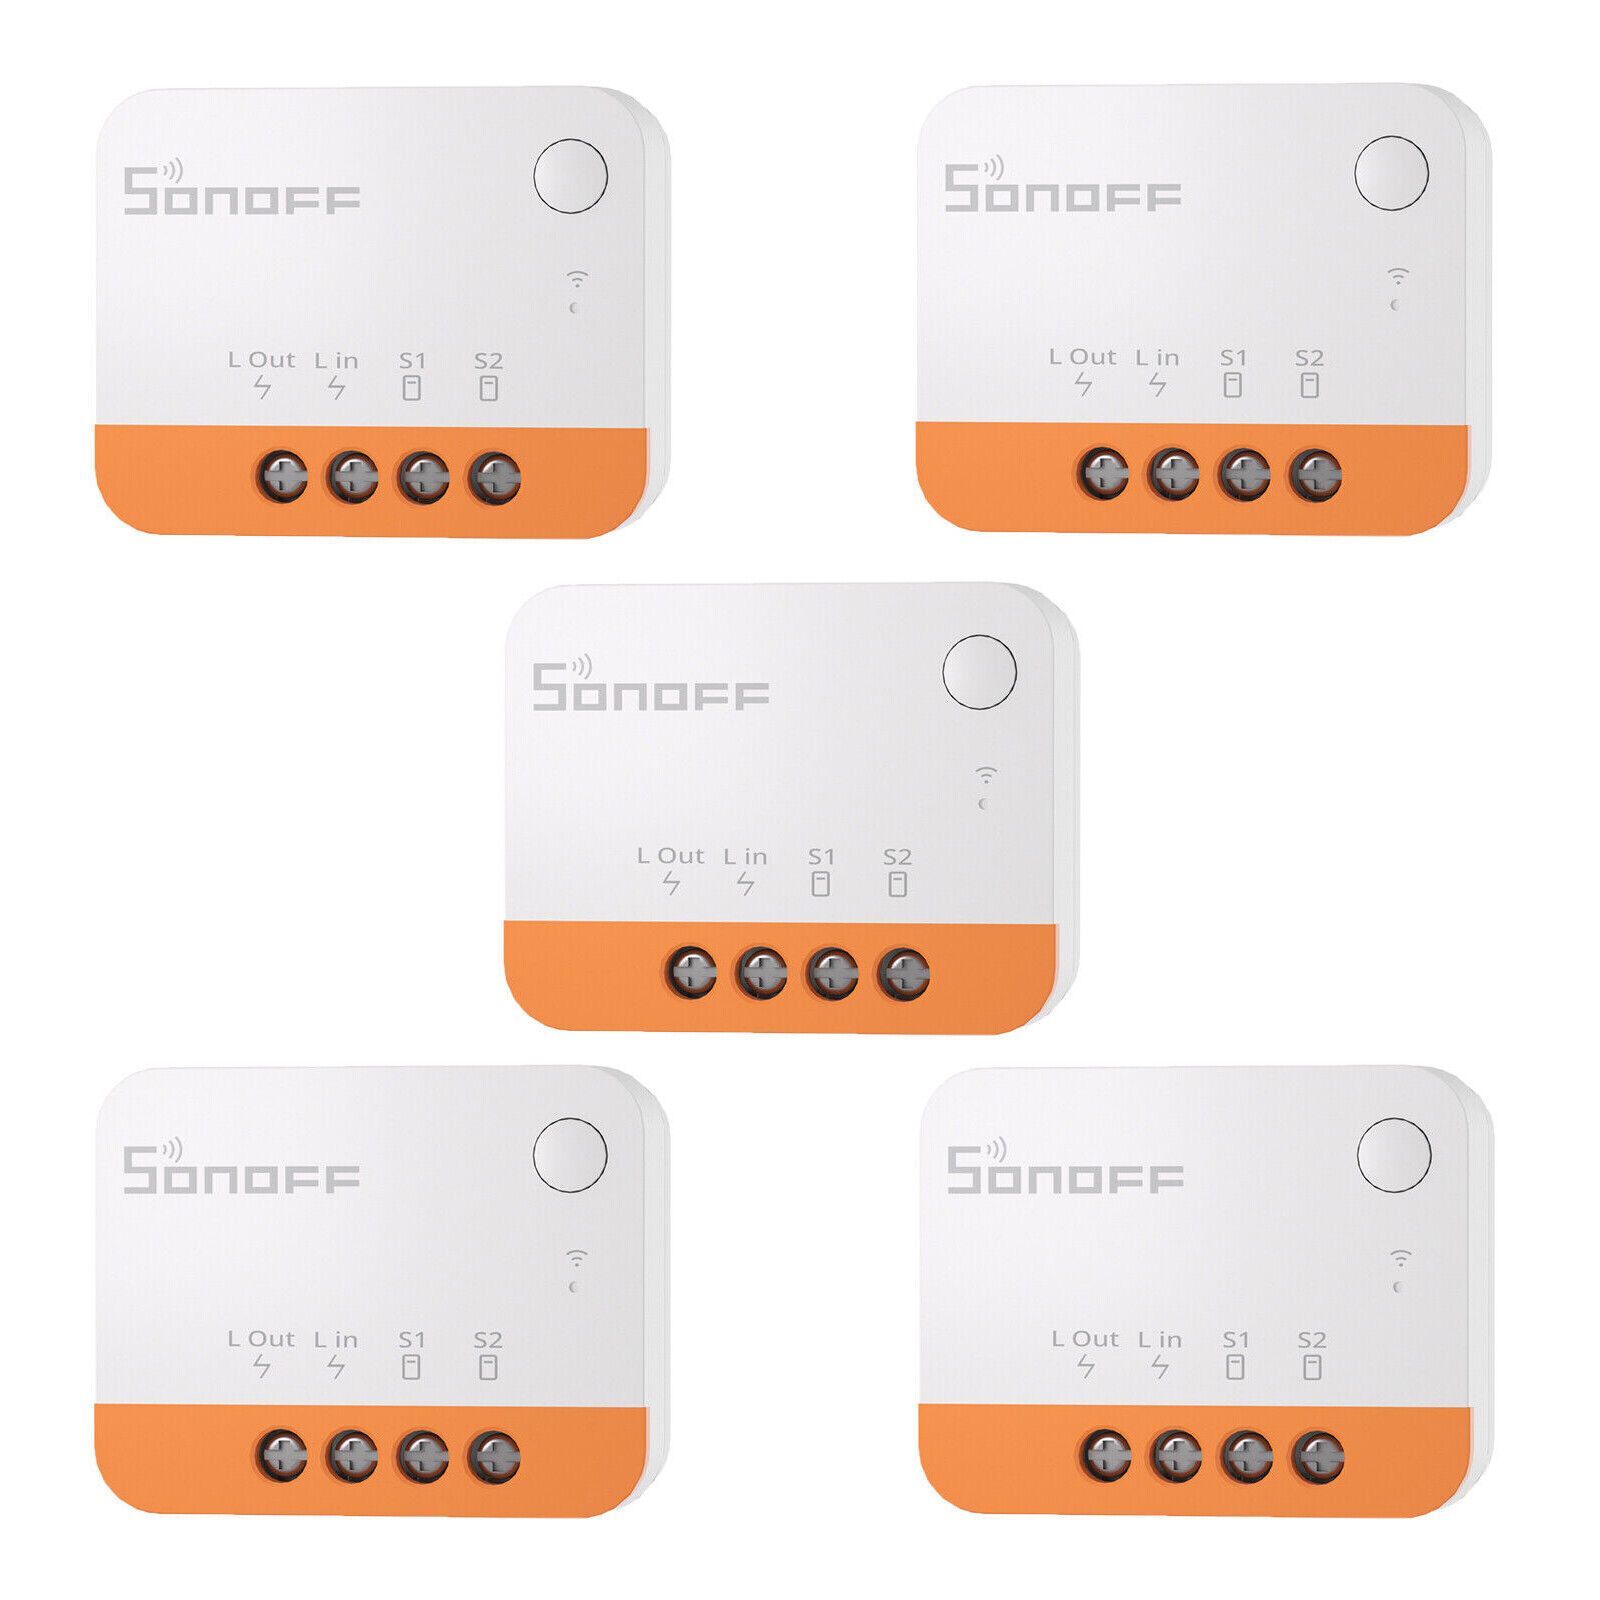 SONOFF ZBMINIL2 Zigbee Smart Switch 5 Pack Timer Scene Two Way Control for Alexa